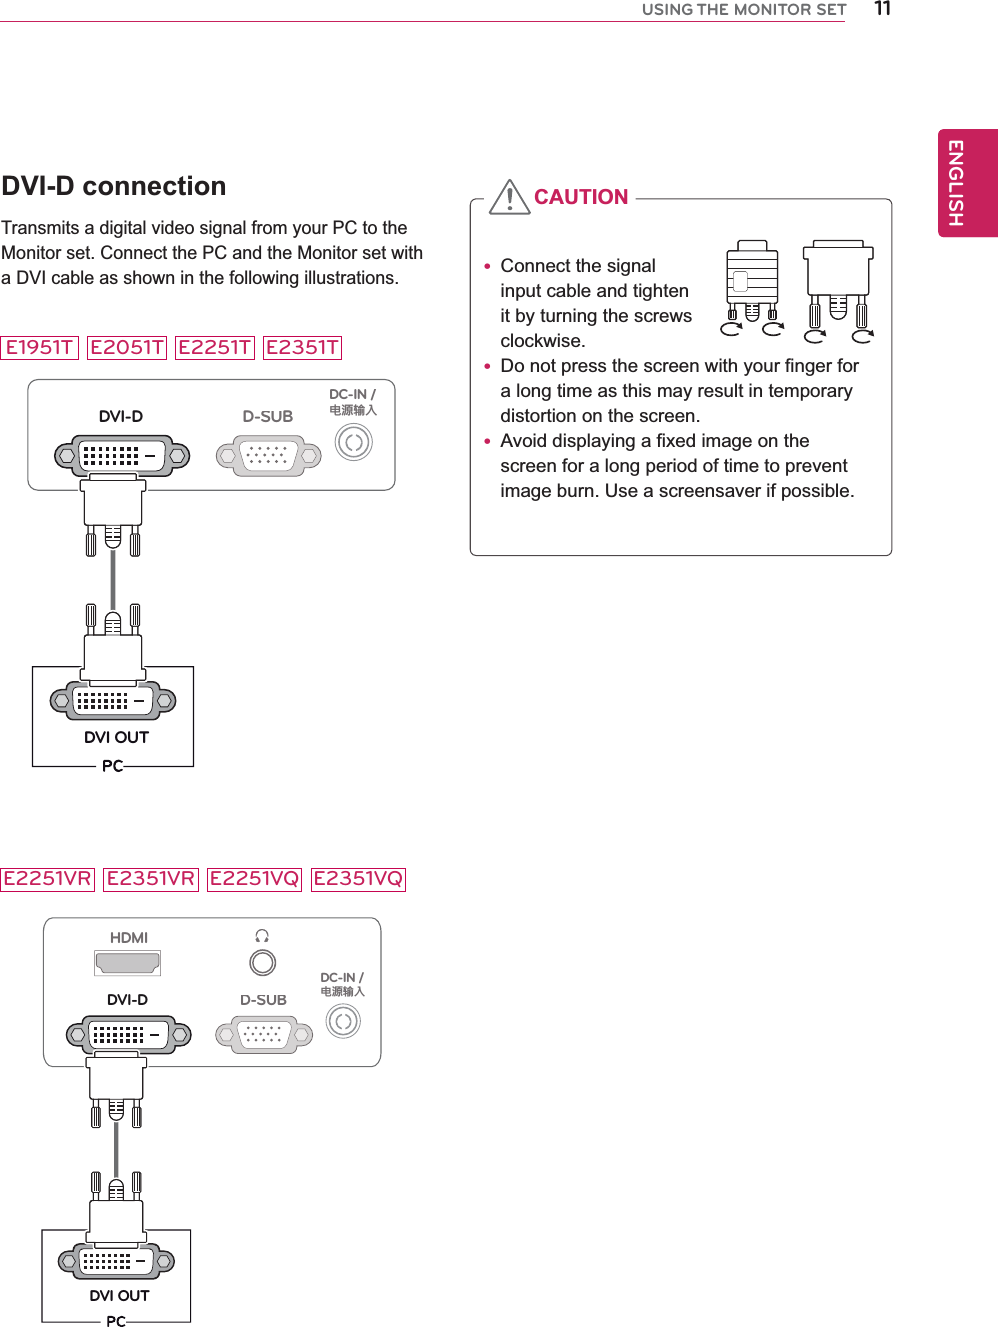 11ENGENGLISHUSING THE MONITOR SETDVI-D connectionTransmits a digital video signal from your PC to the Monitor set. Connect the PC and the Monitor set with a DVI cable as shown in the following illustrations.D-SUBDVI-DDVI OUTDC-IN /䏳㵎幑‣HDMID-SUBDVI-DDVI OUTDC-IN /䏳㵎幑‣ Connect the signal input cable and tighten it by turning the screws clockwise. Do not press the screen with your finger for  a long time as this may result in temporary distortion on the screen. Avoid displaying a fixed image on the screen for a long period of time to prevent image burn. Use a screensaver if possible.CAUTIONE2051TE1951T E2251T E2351TE2251VR E2351VR E2251VQ E2351VQ